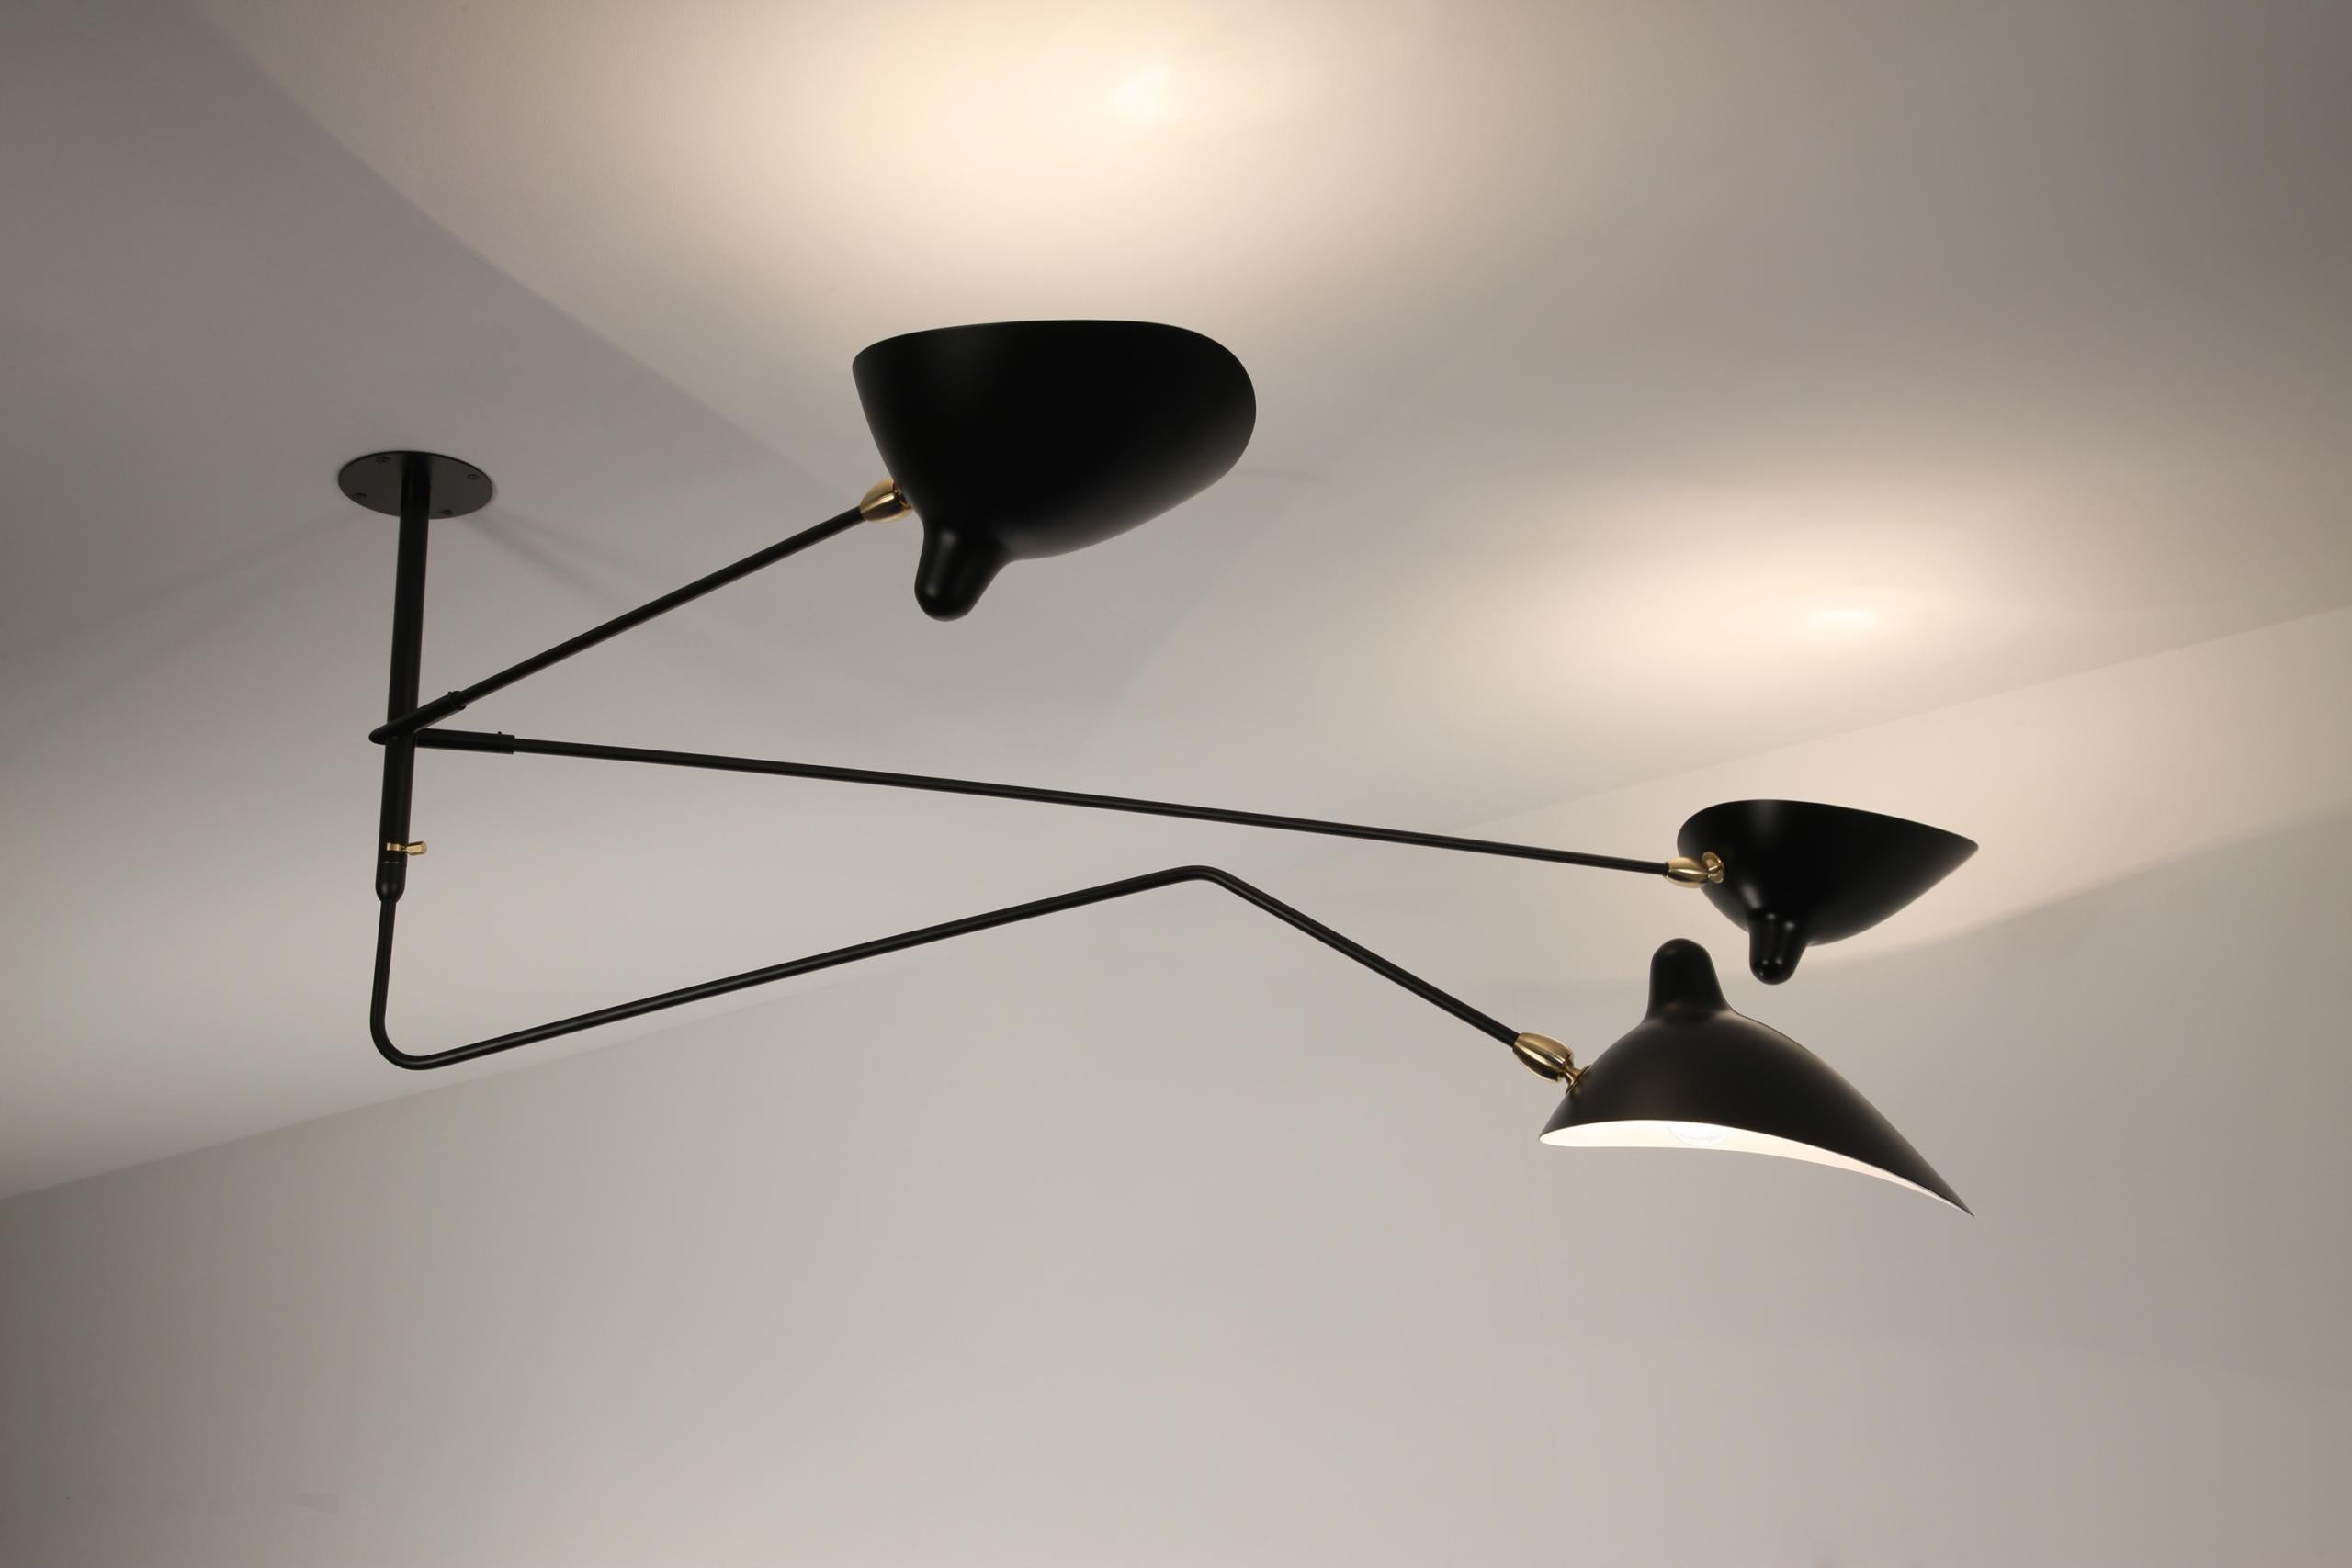 Serge Mouille 'Deux Bras Fixes Un Courbe Pivotant' ceiling lamp in black.

Originally designed in 1956, this iconic ceiling lamp is still made by Edition Serge Mouille in France using many of the same small-scale manufacturing techniques and